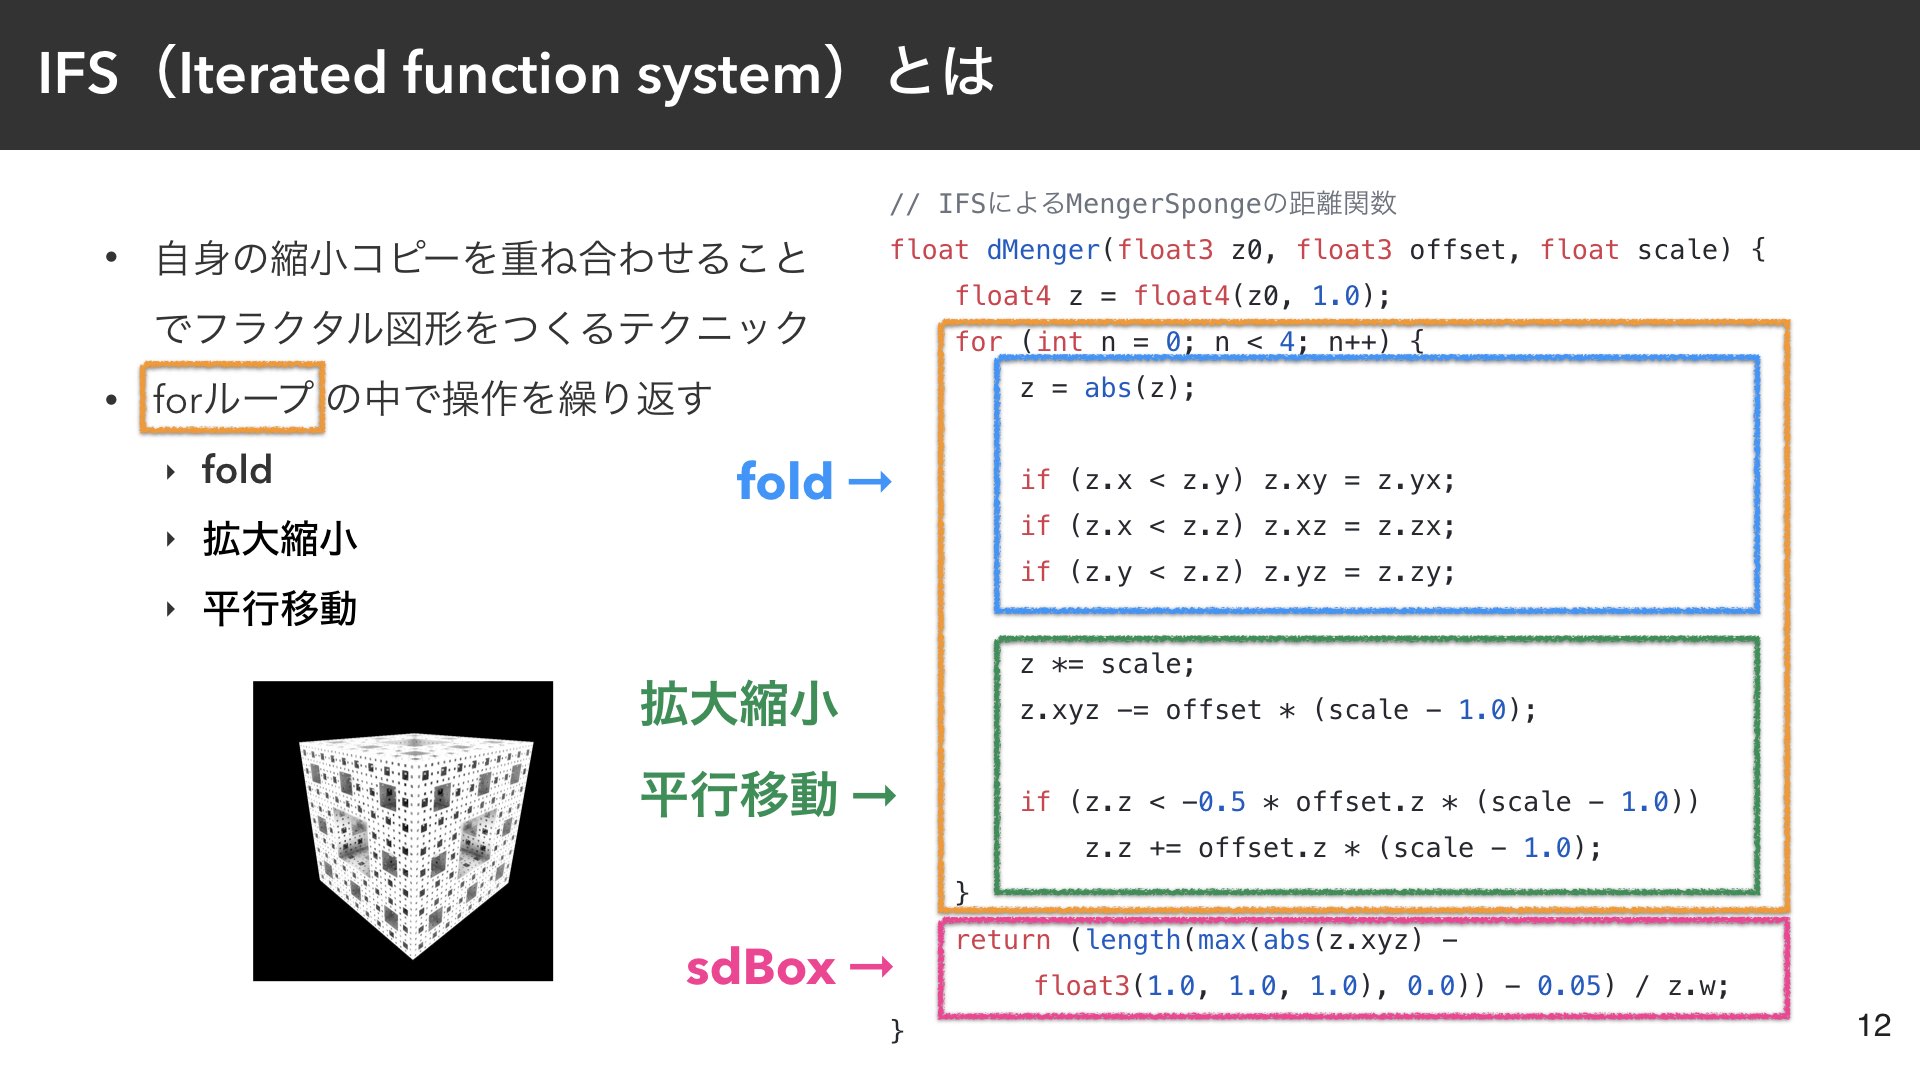 IFS（Iterated function system）とは